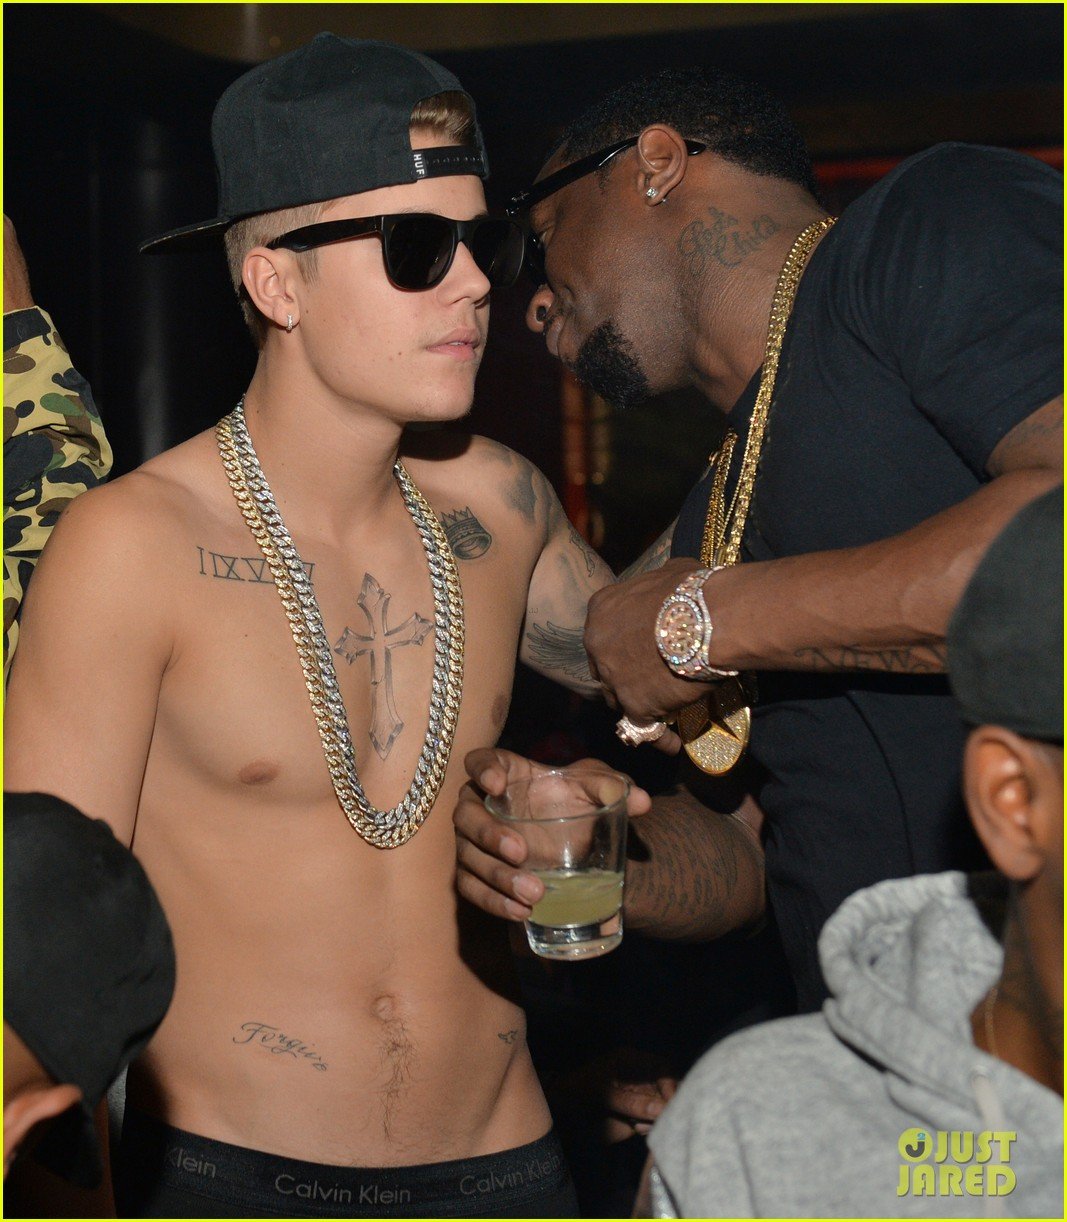 Justin Bieber Hangs Shirtless, Parties in Underwear with Sean 'Diddy' Combs!: Photo 3048615 | Justin Bieber, Rick Ross, Sean Combs, Shirtless Photos | Just Jared: Entertainment News